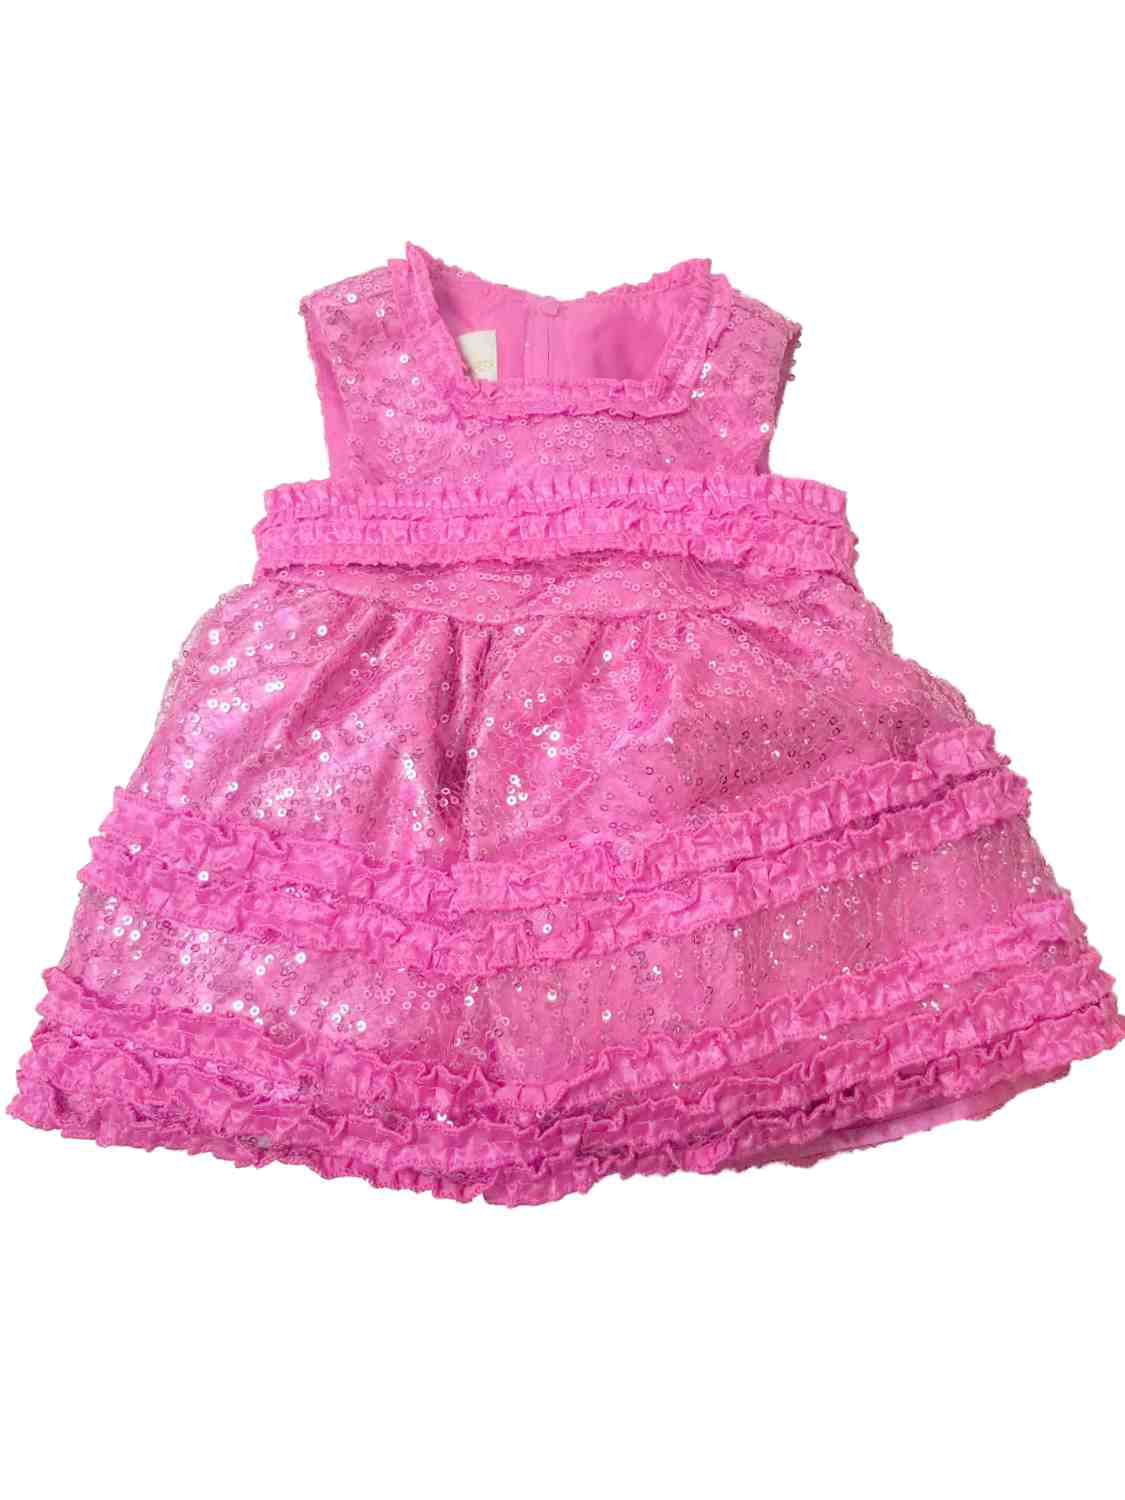 Girls AMERICAN PRINCESS boutique dress 4 6 7 NWT Easter party pink ruffles